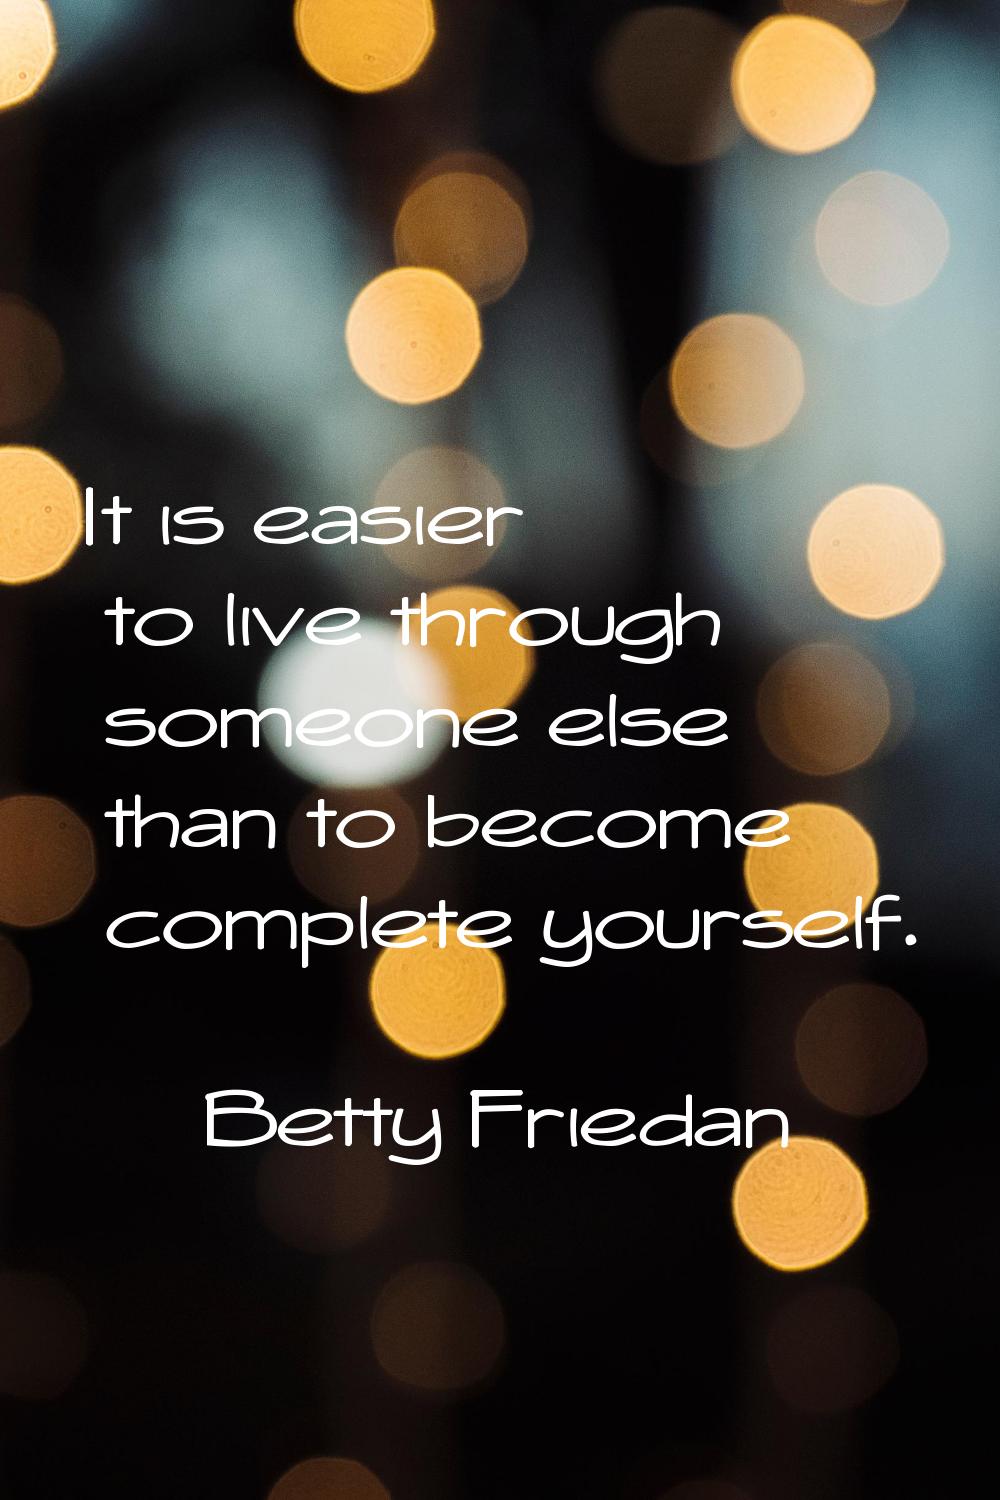 It is easier to live through someone else than to become complete yourself.